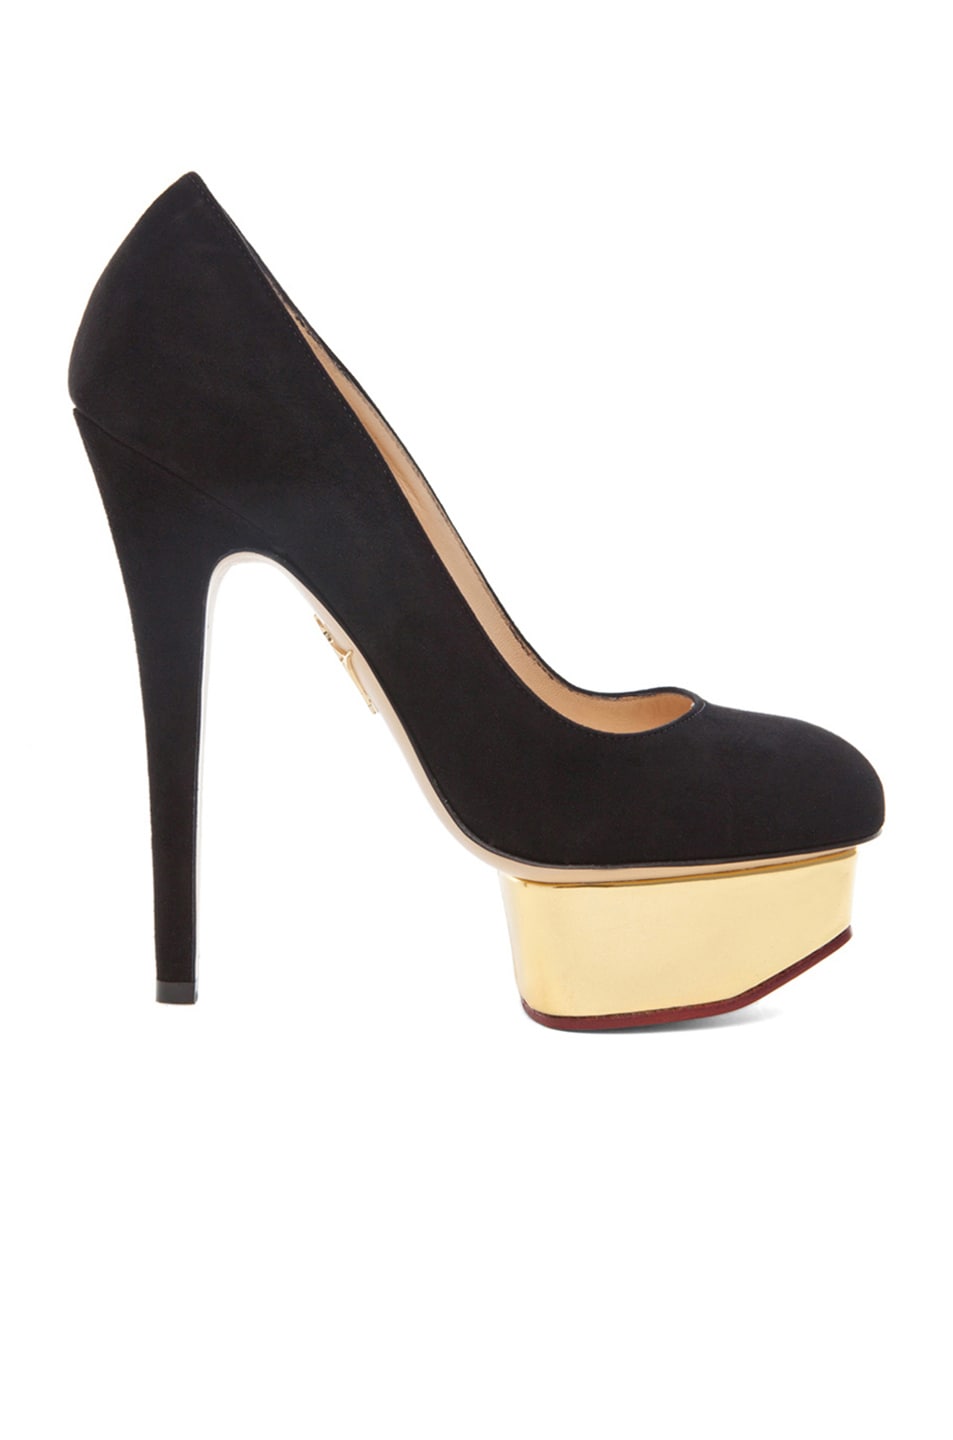 Image 1 of Charlotte Olympia Dolly Signature Court Island Suede Pumps in Black Suede